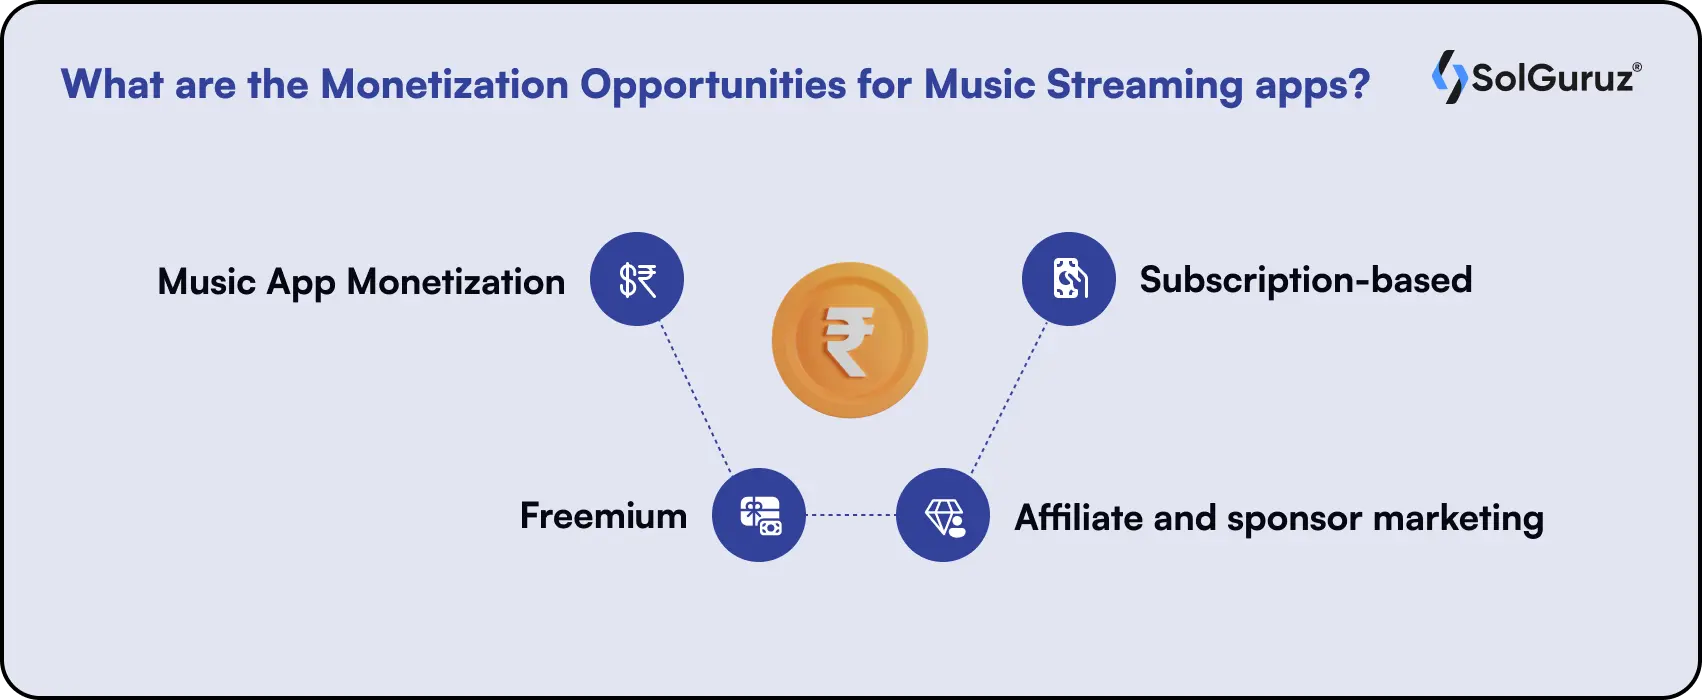 What are the Monetization Opportunities for Music Streaming apps